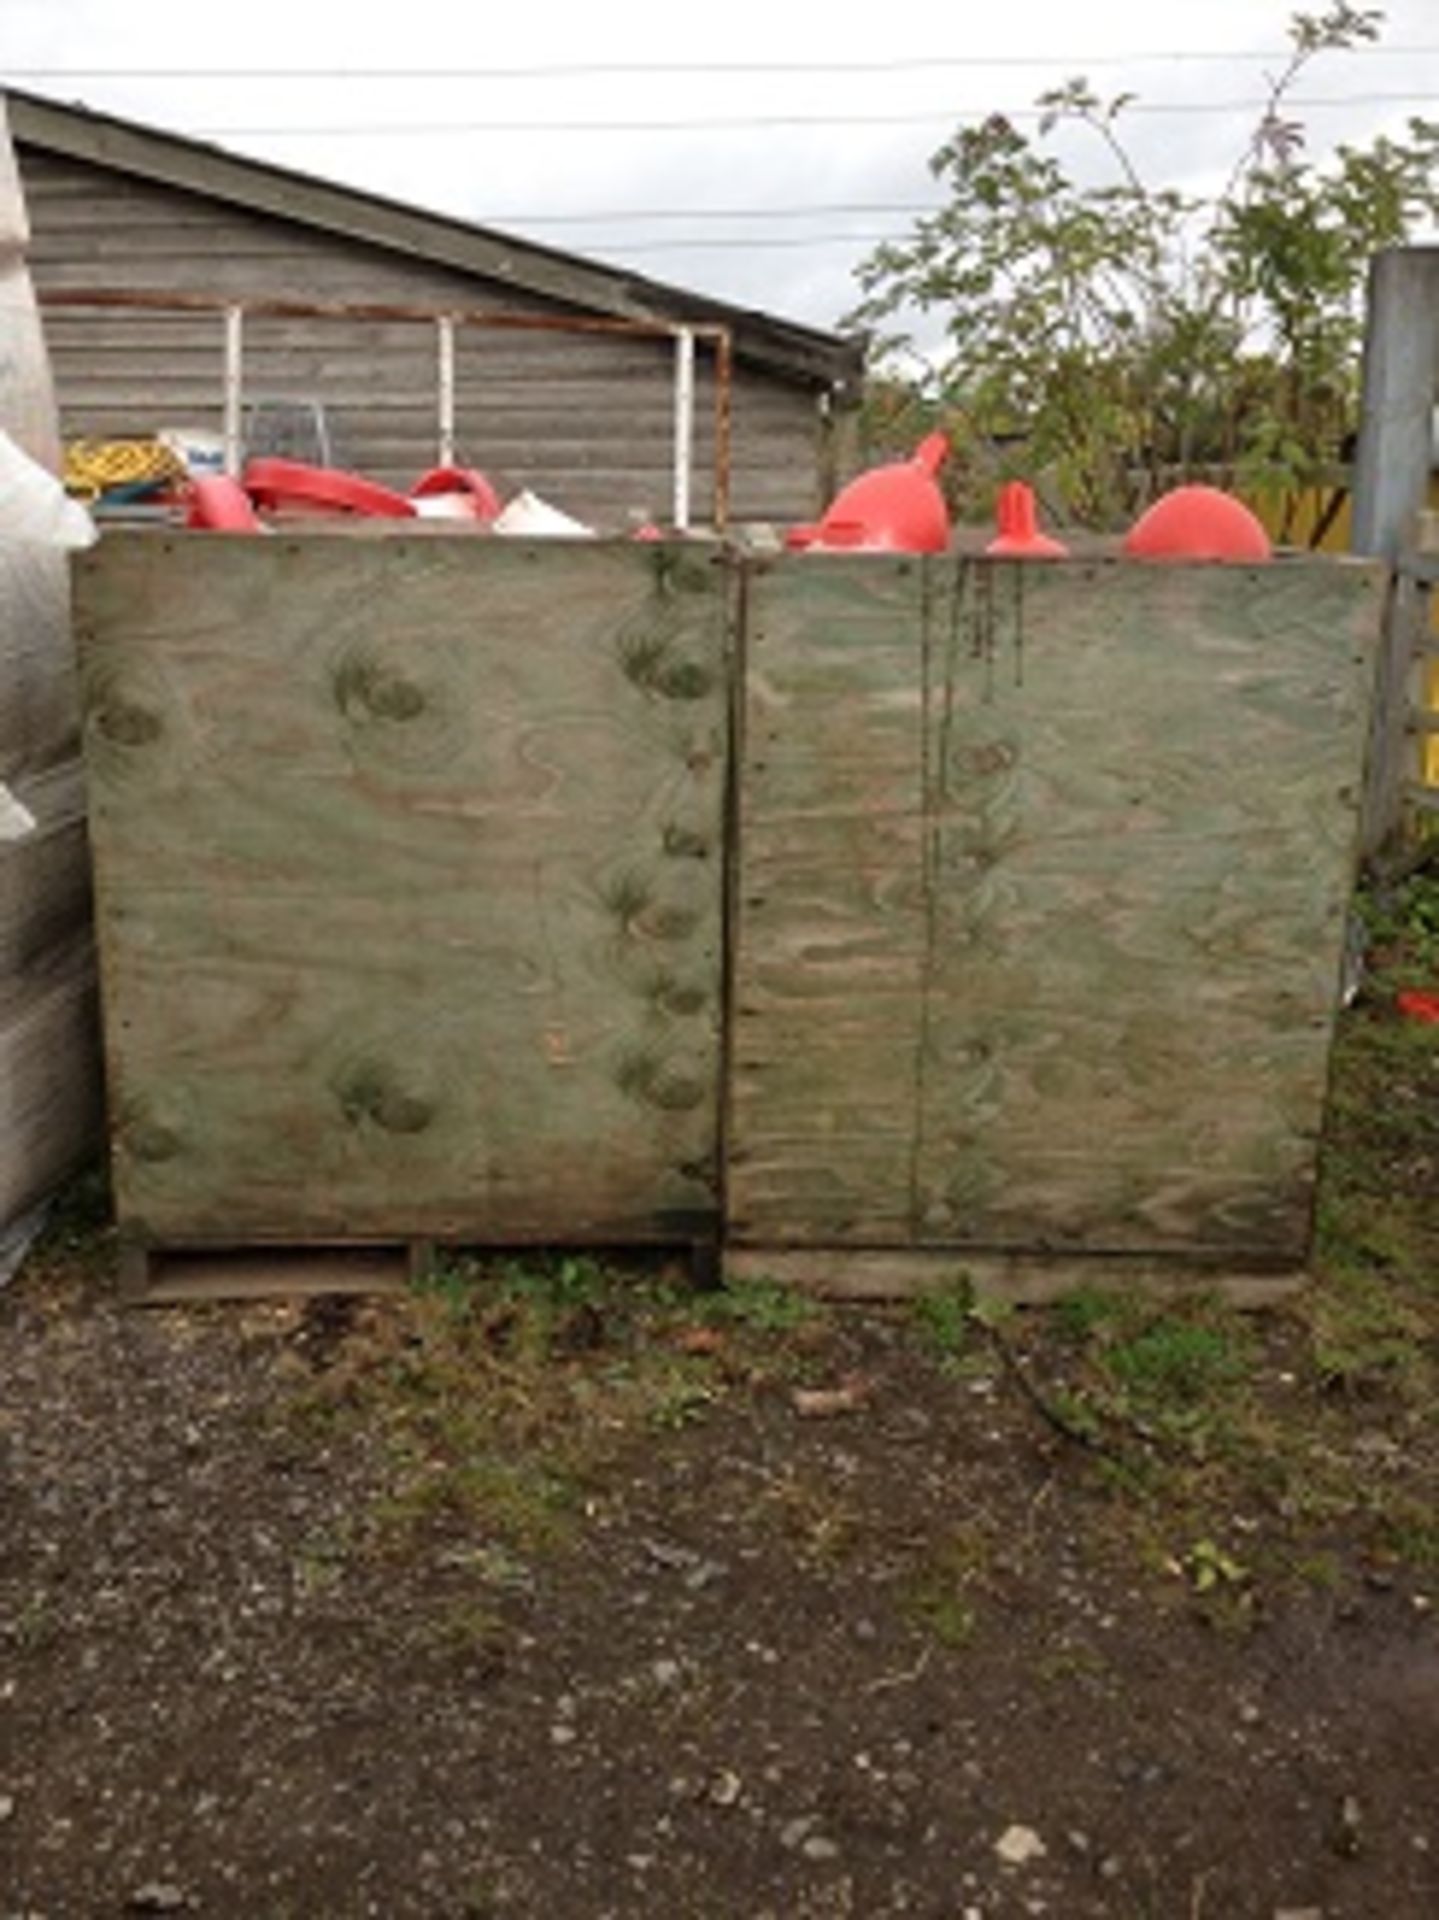 APPROX 300 AUTOMATIC CHICKEN FEEDERS & DRINKERS - 20 FT BOX LORRY REQUIRED TO MOVE!! - Image 2 of 10